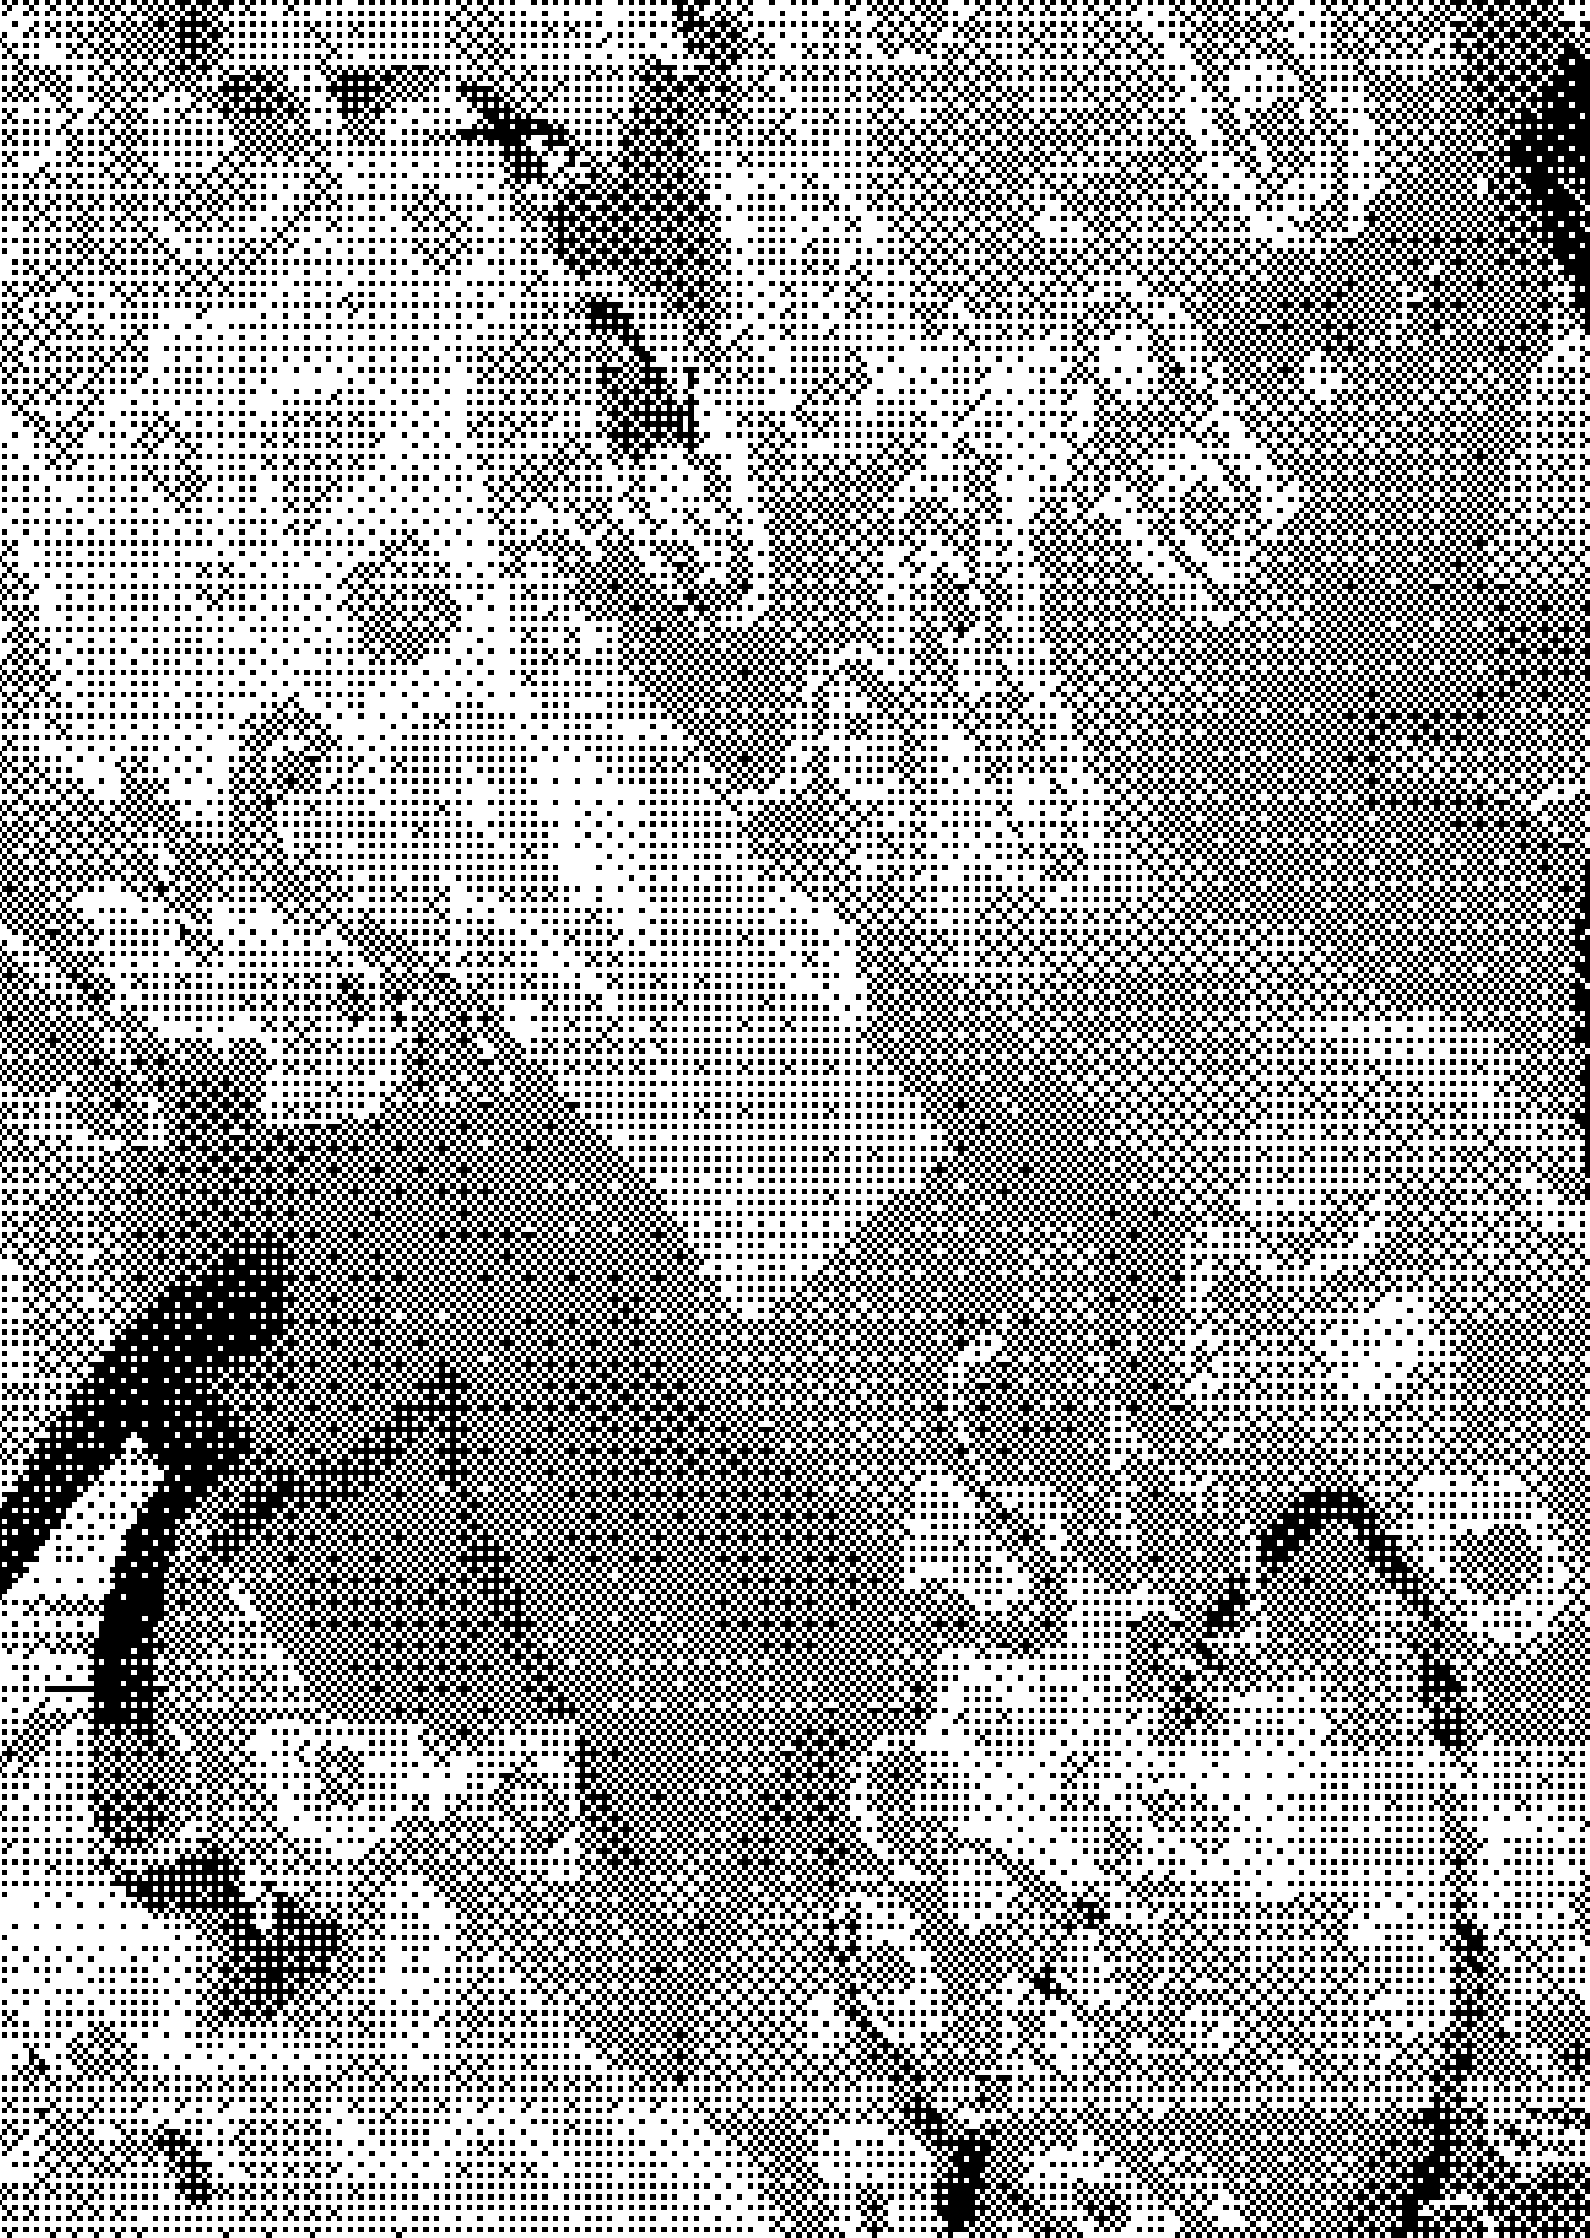 Pixel art. black and white textures.